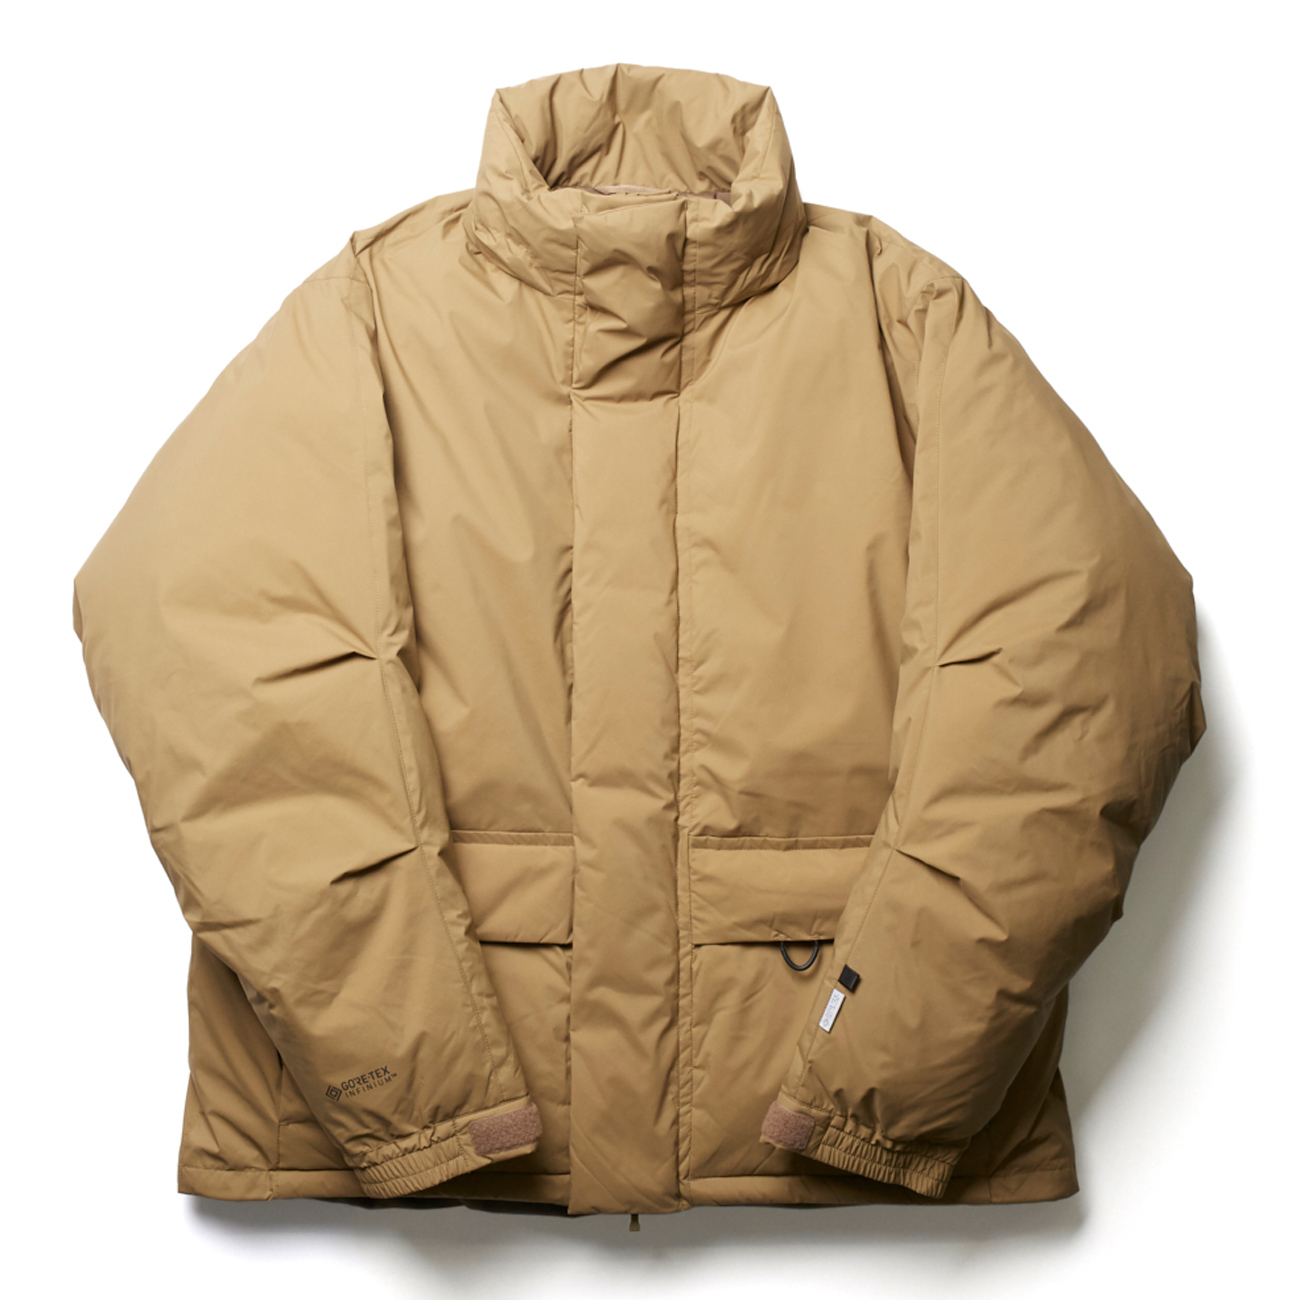 GORE-TEX INFINIUM EXPEDITION DOWN JACKET - Olive